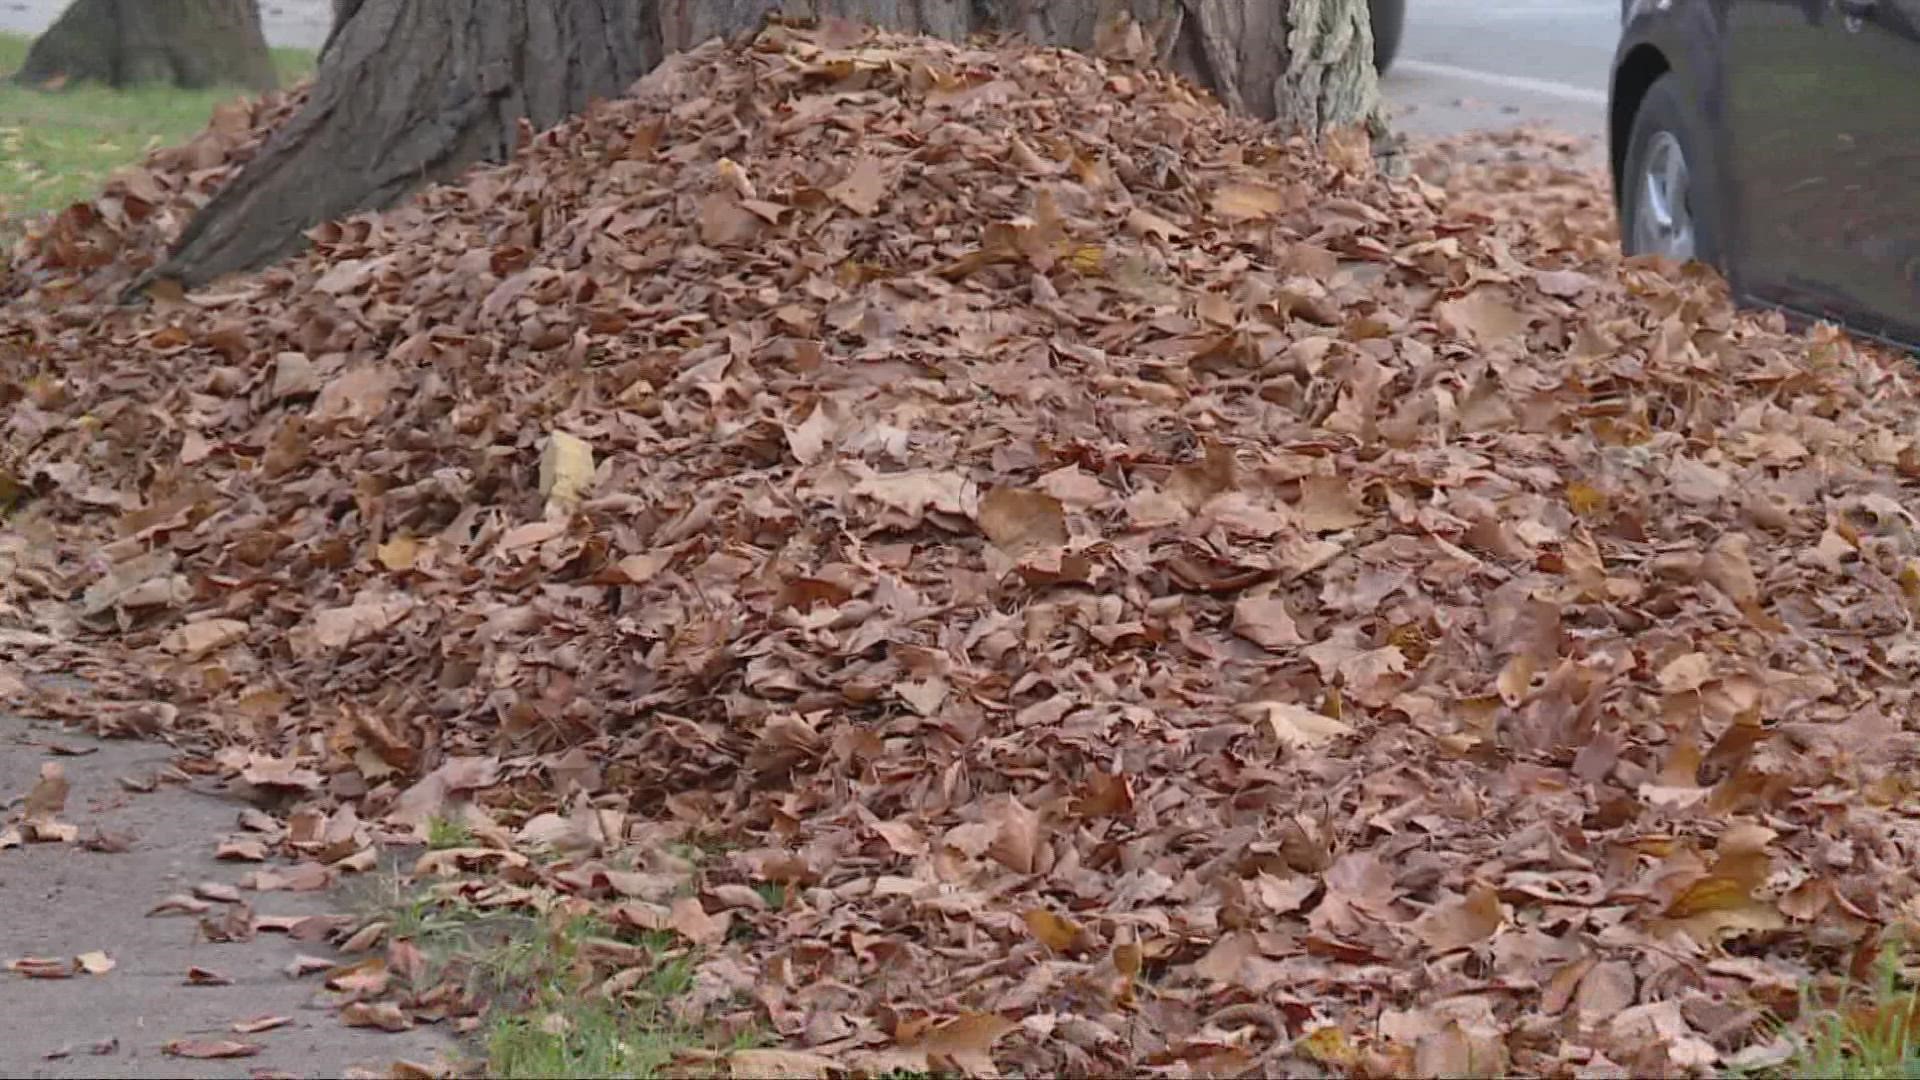 Cleveland residents are being required to bag their leaves instead of raking them to the tree lawn.